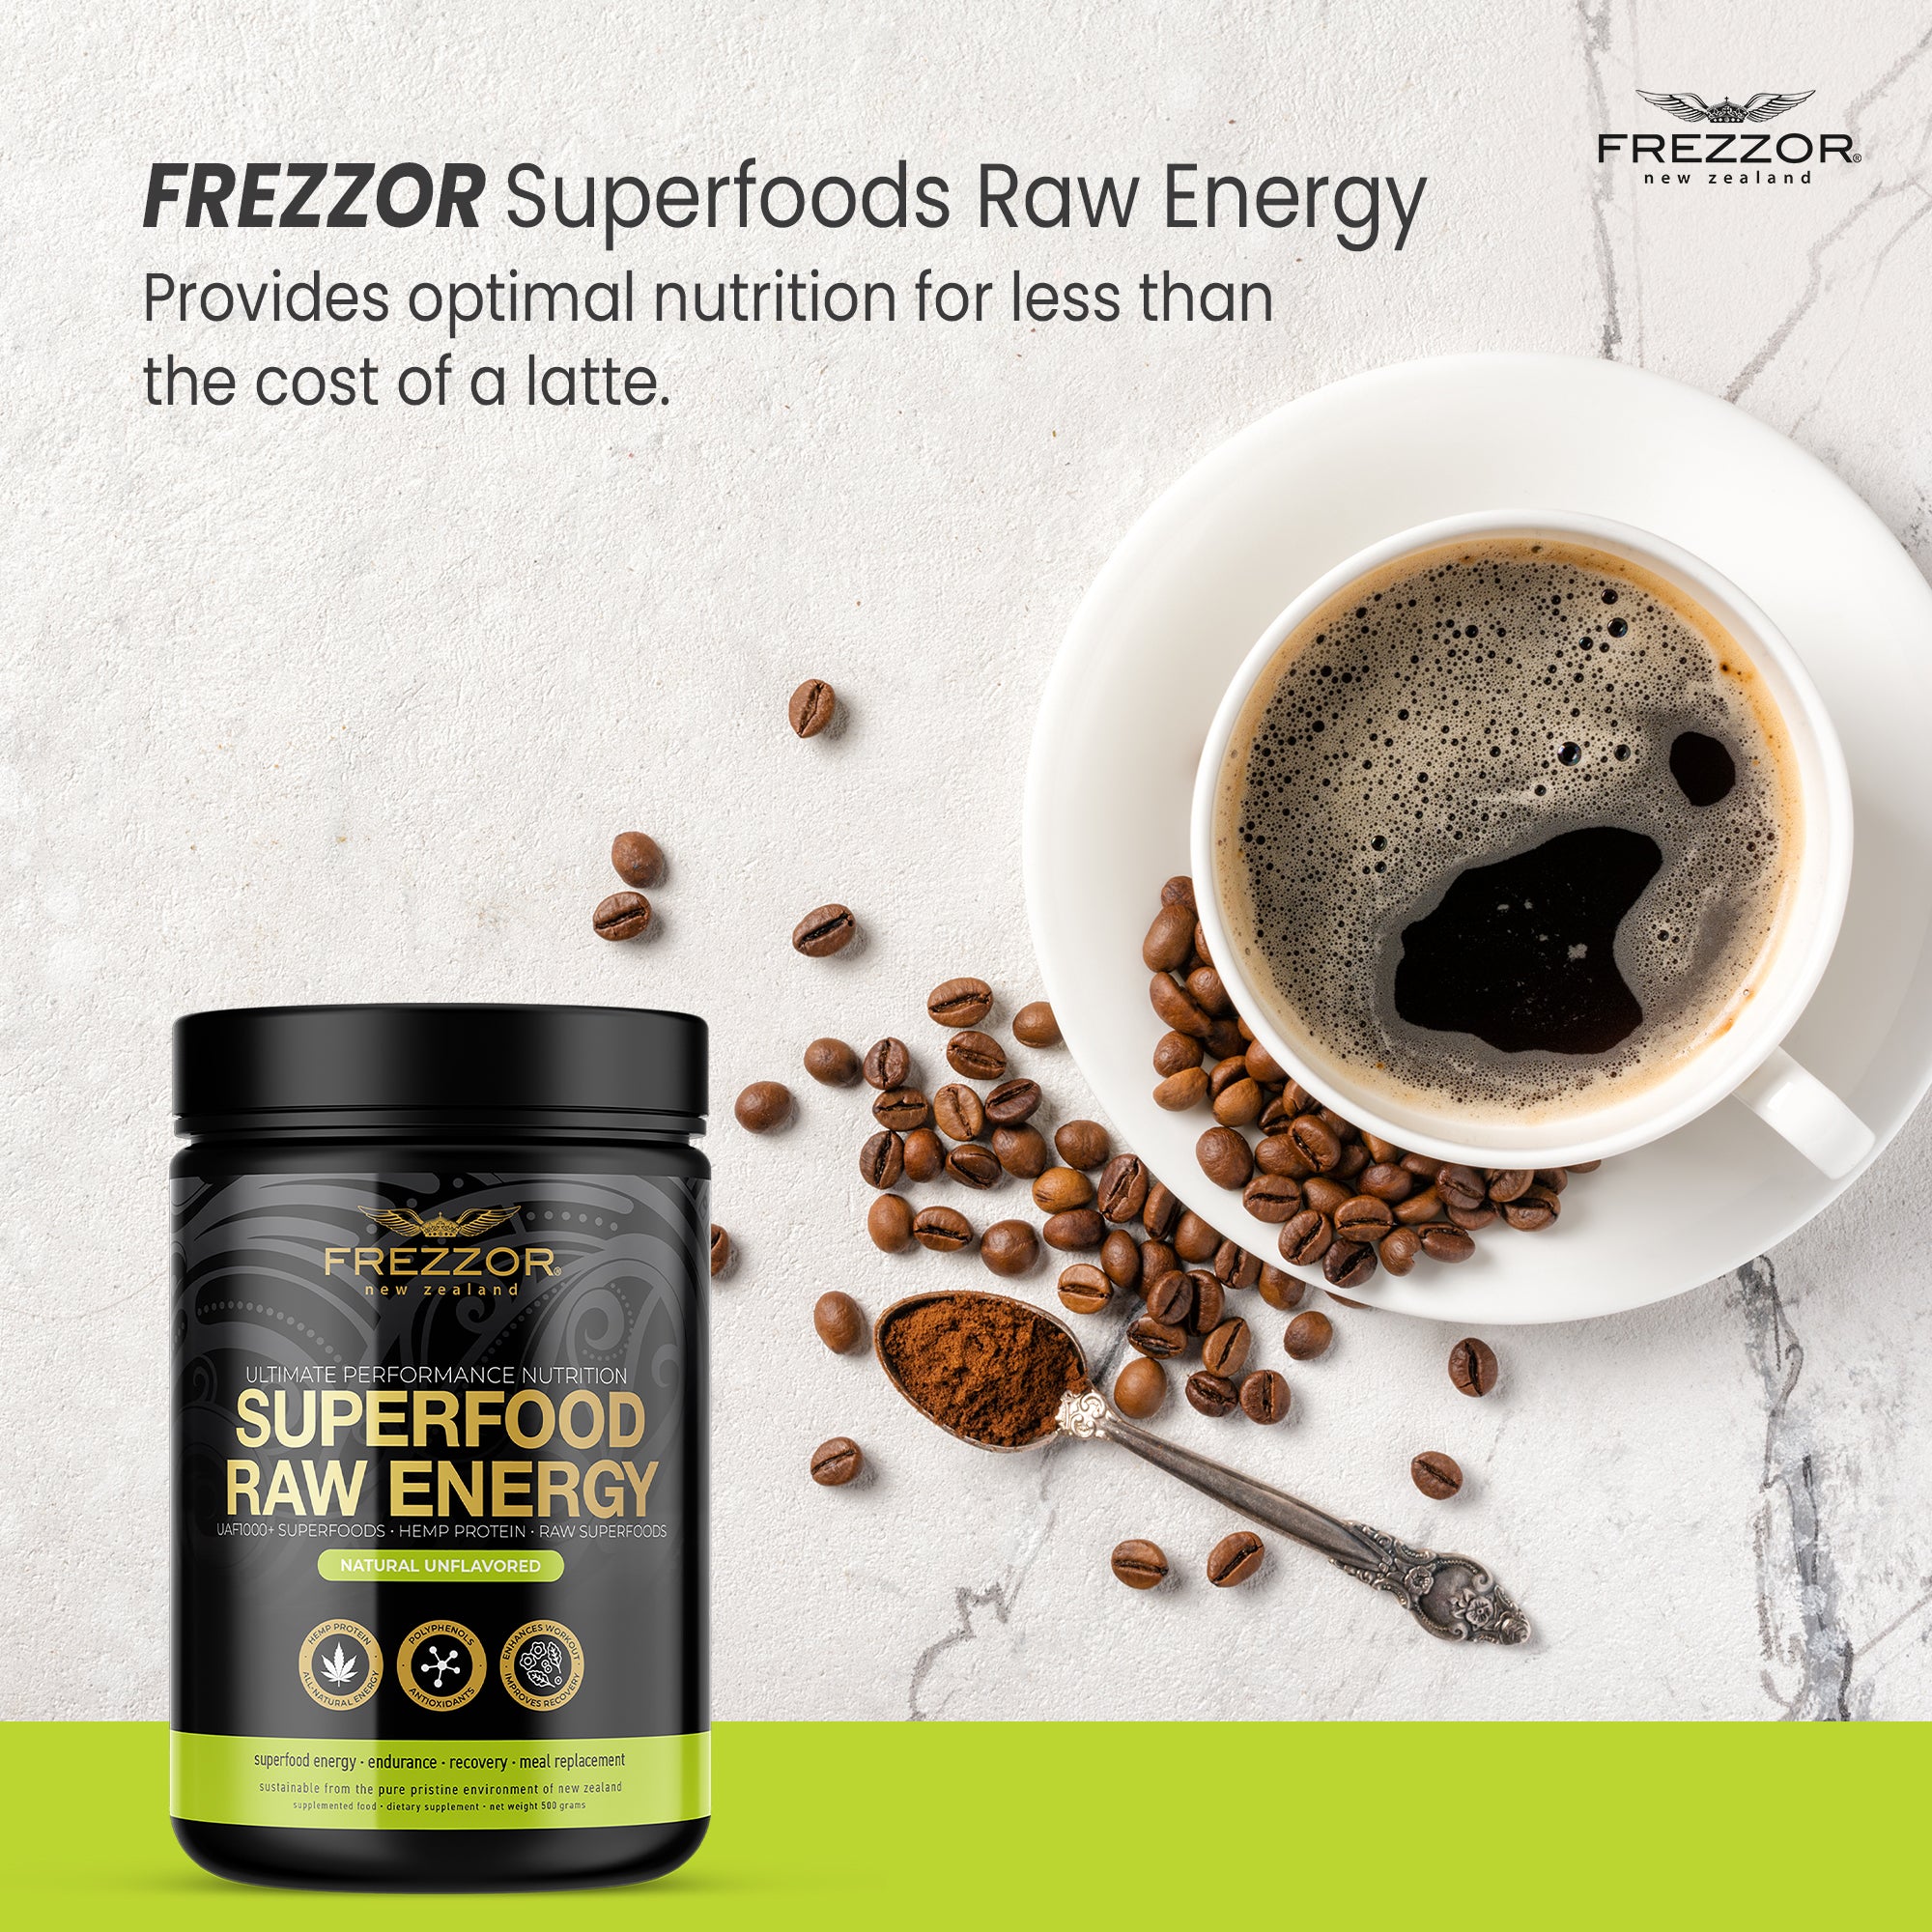 Superfood Powder  FREZZOR Raw NZ superfood protein powder supplements for daily energy 